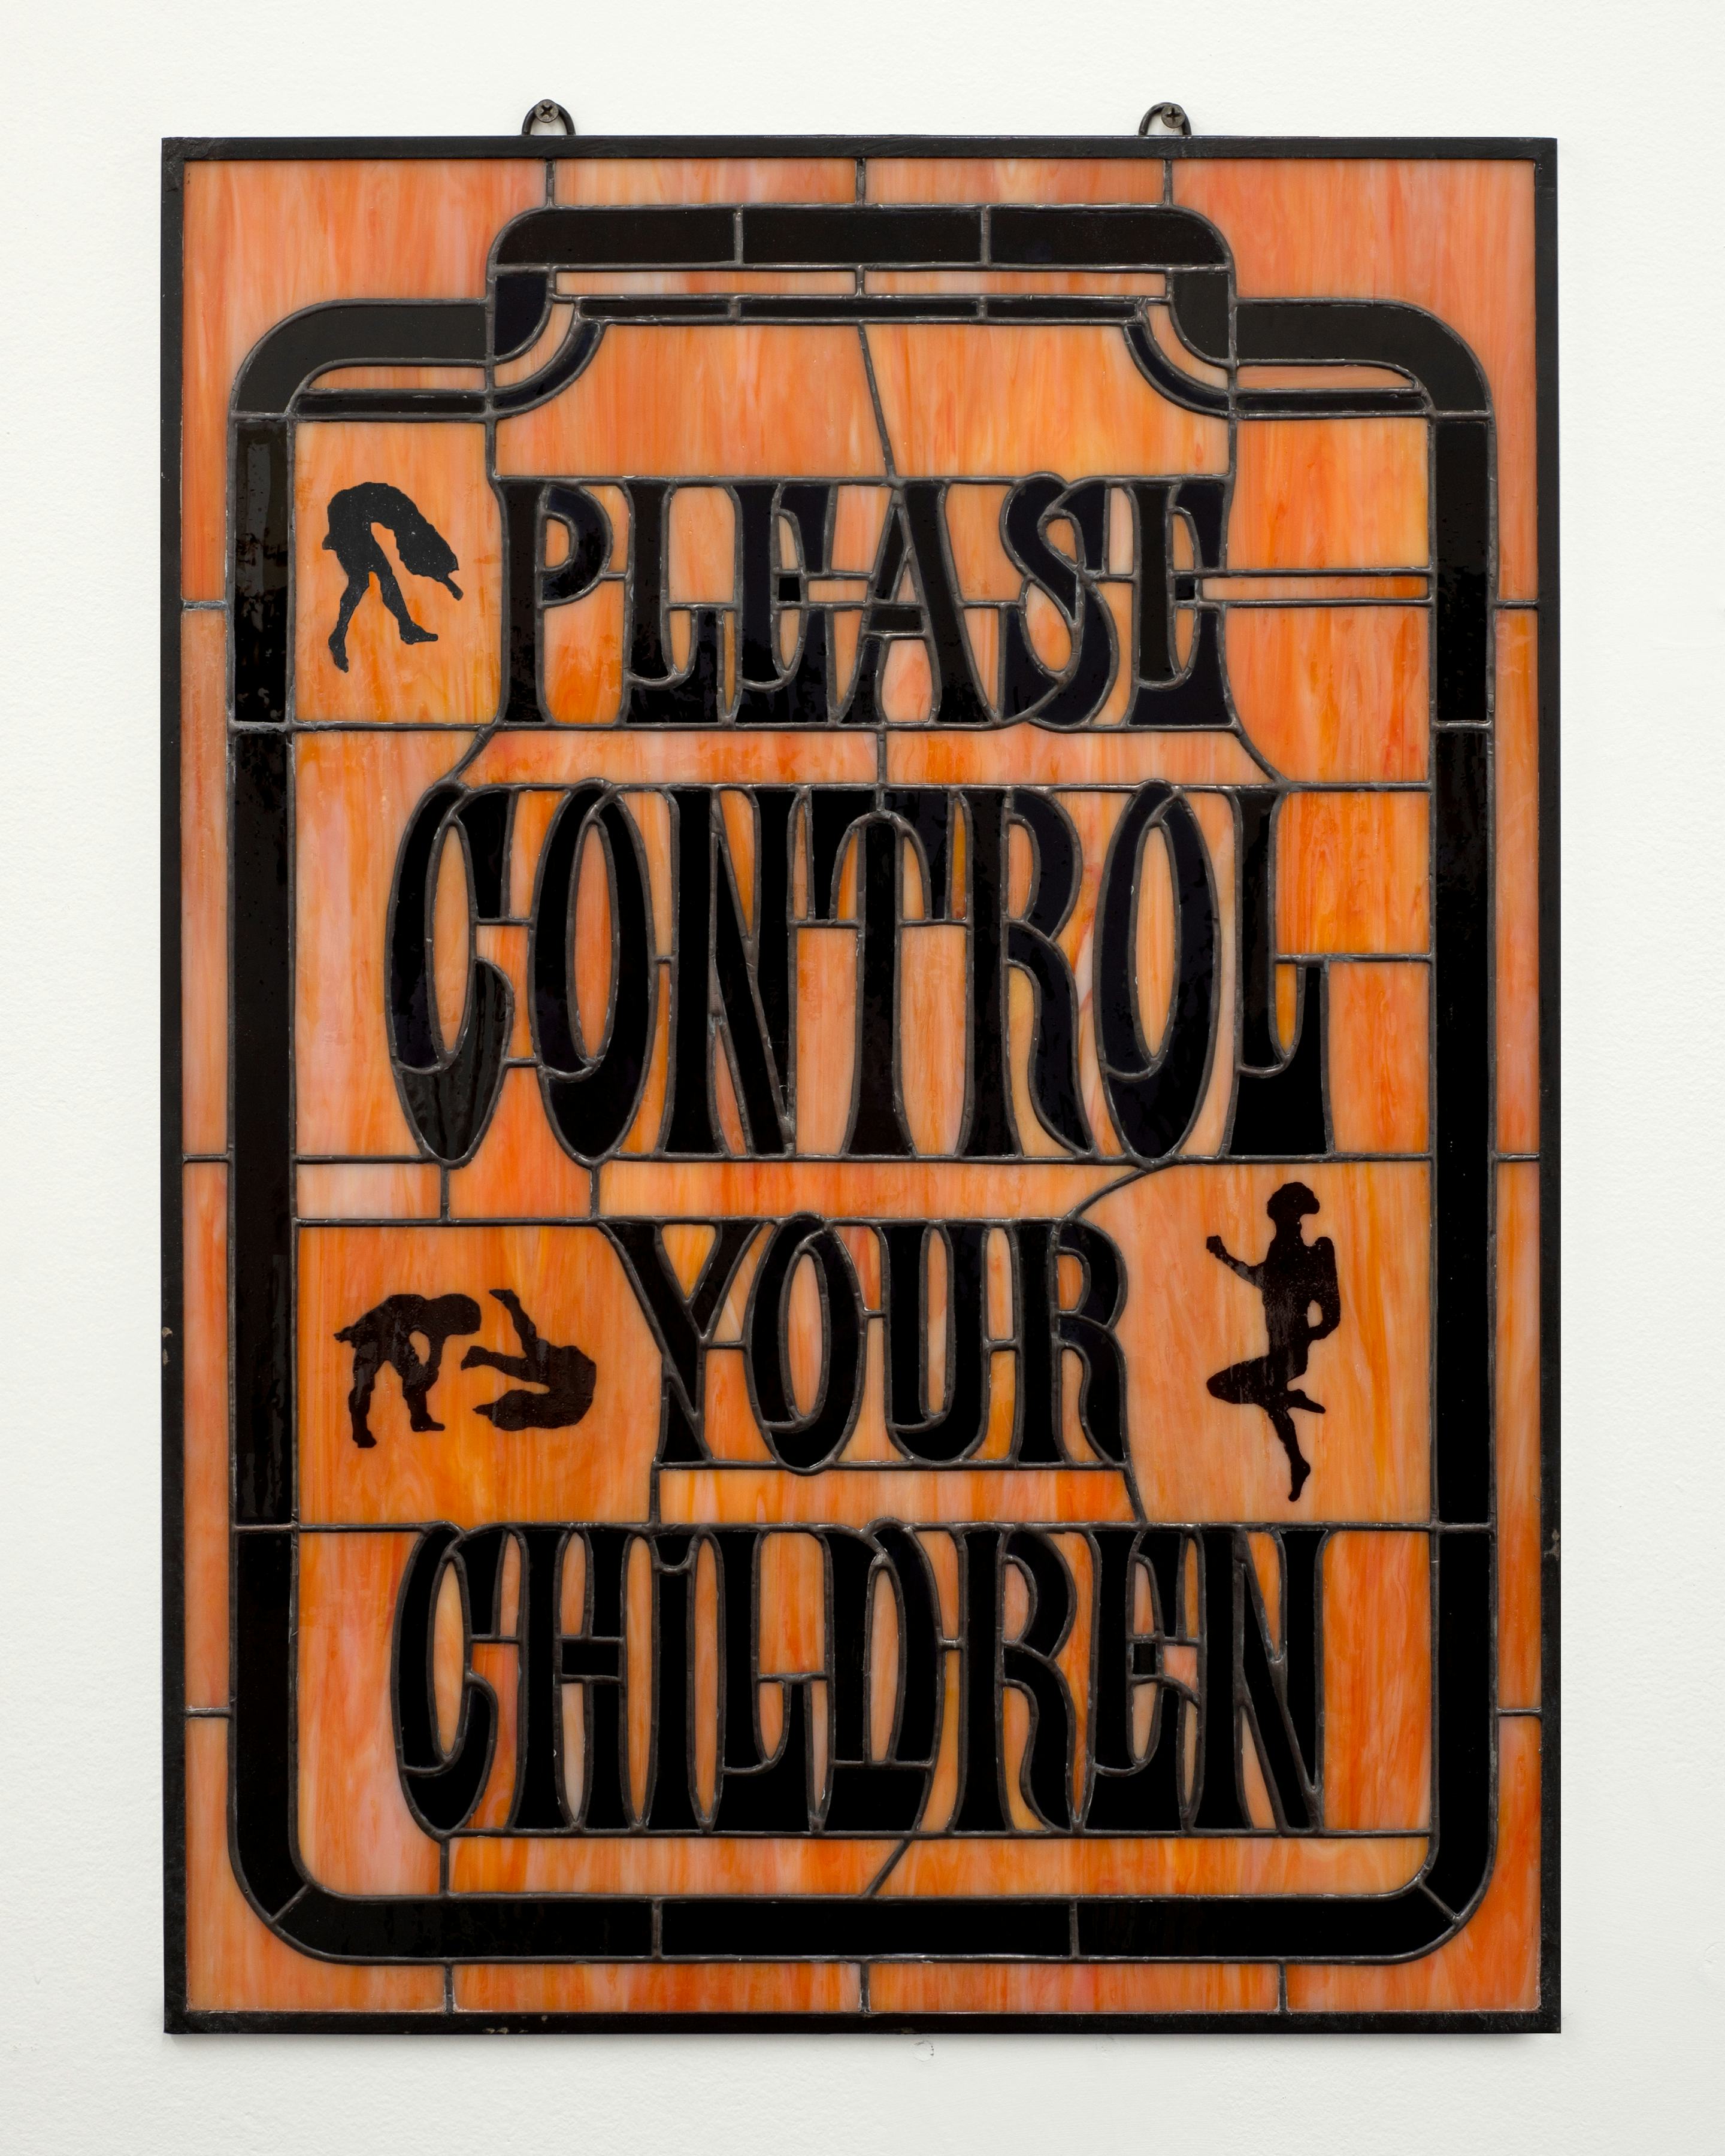 Please Control Your Children (2021)

Stained glass, solder

18w x 24h inches (45.72w x 60.96h cm)